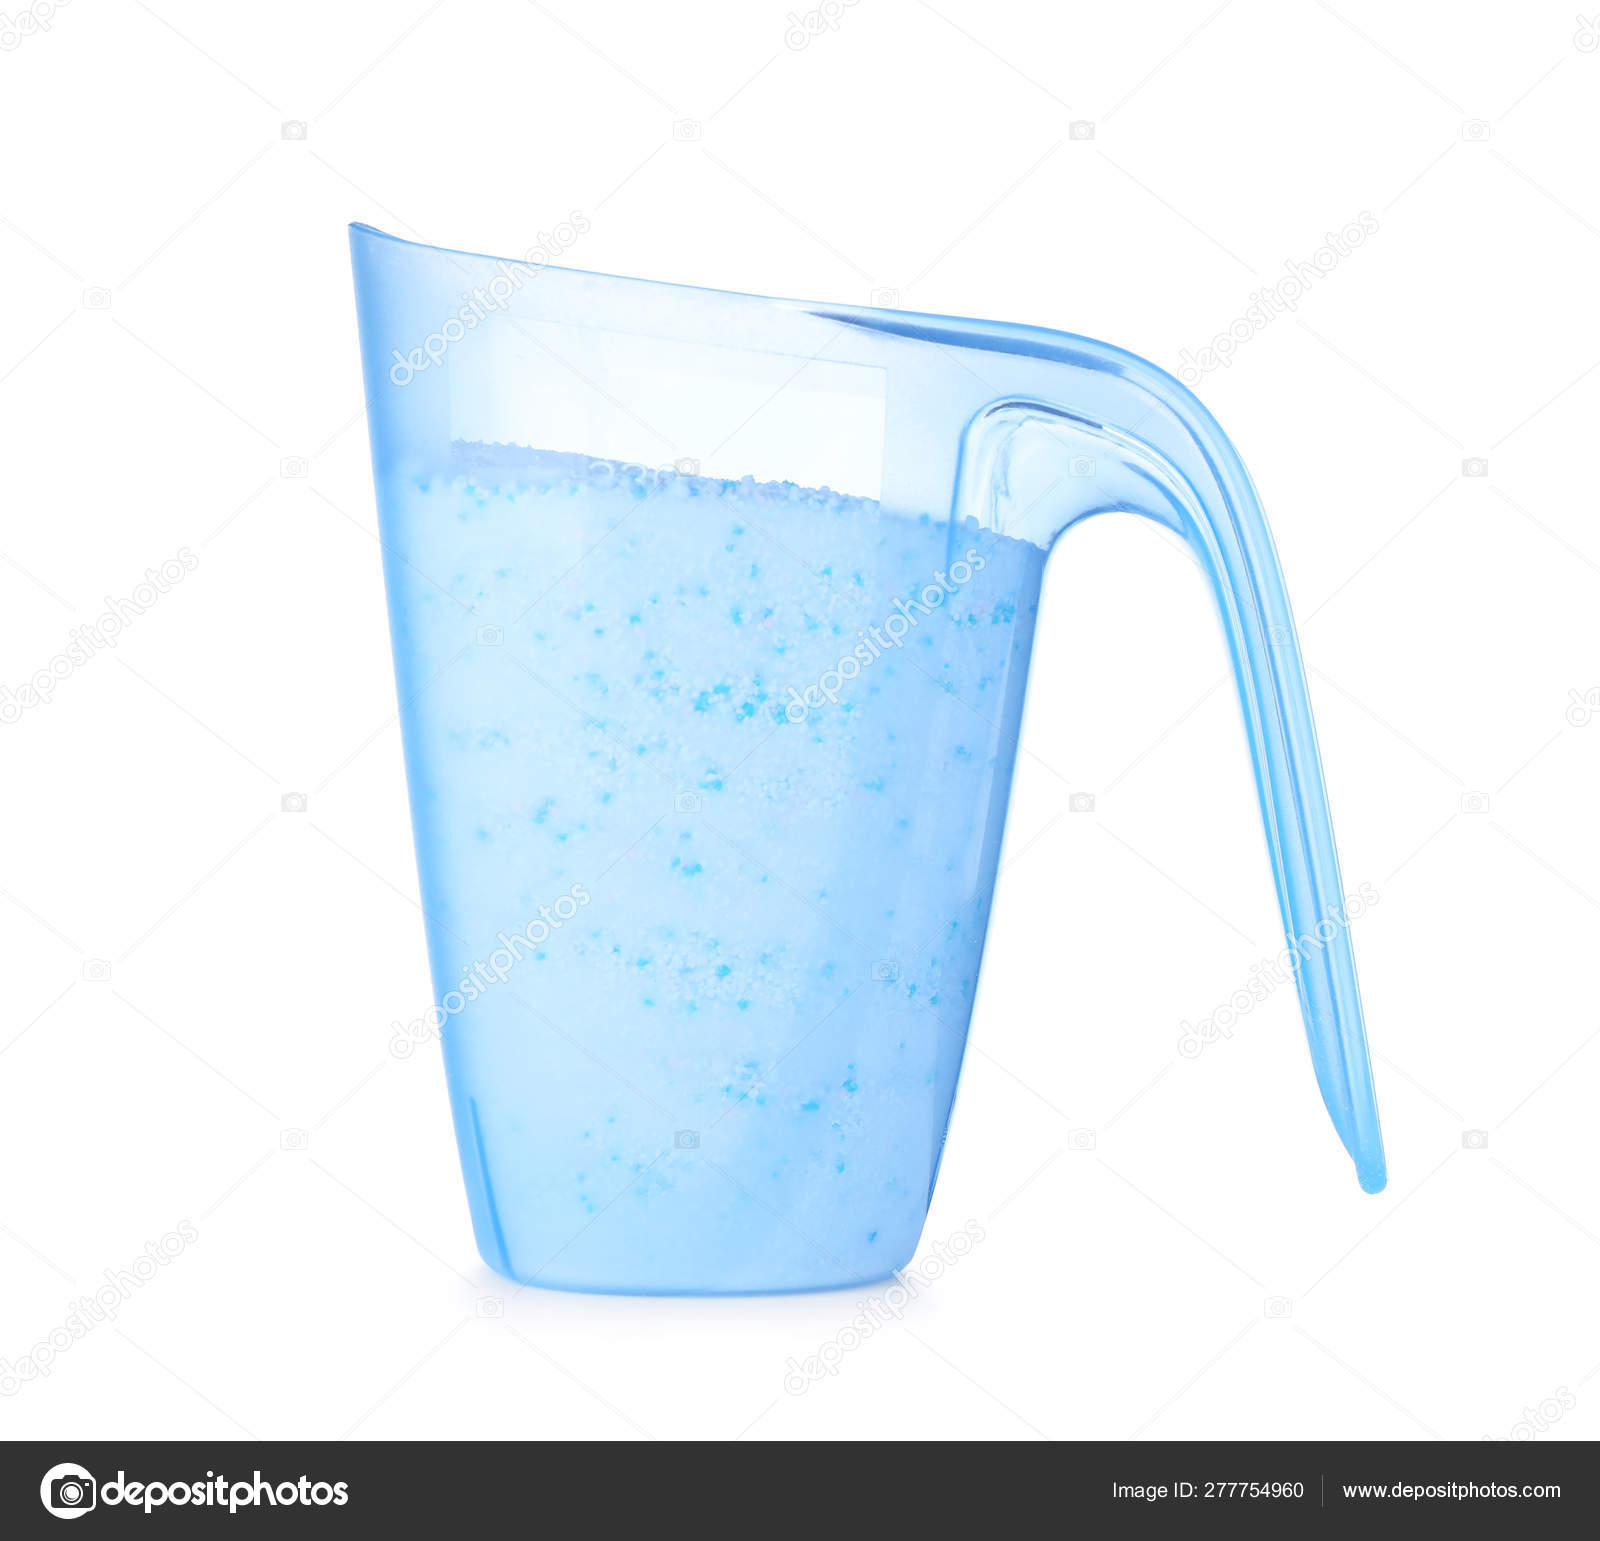 Laundry detergent in plastic measuring cup on white background